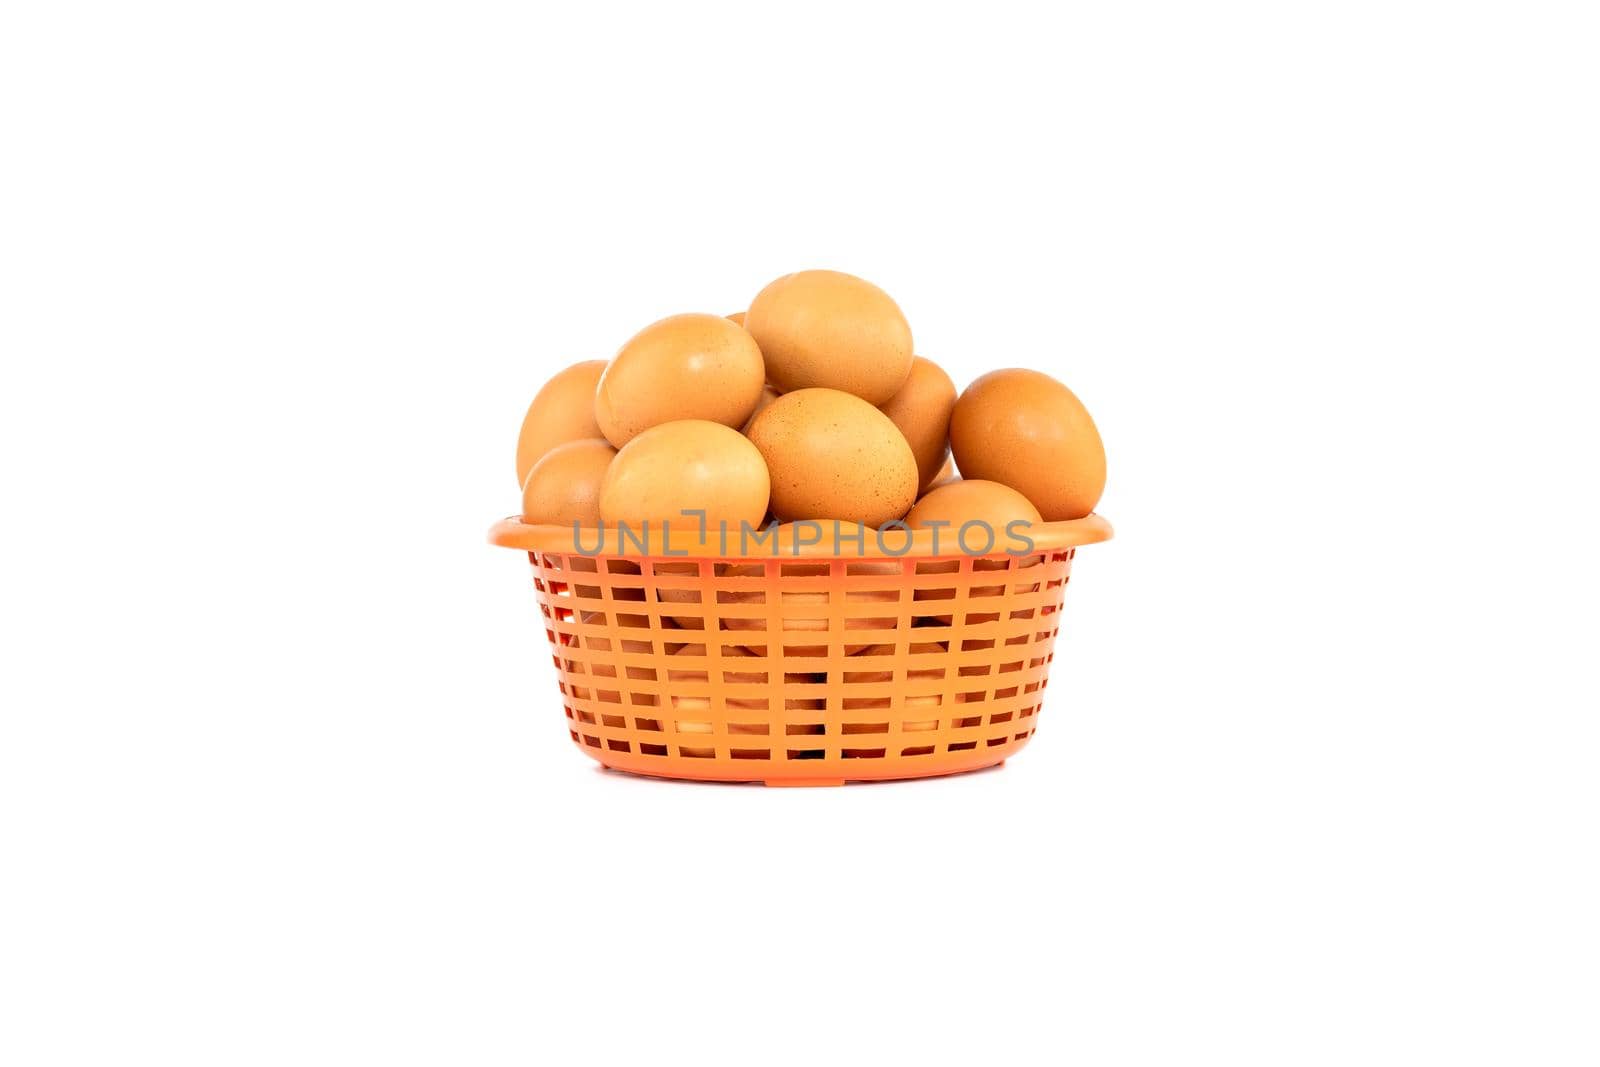 Group of eggs in an orange plastic basket isolated on white background by wattanaphob